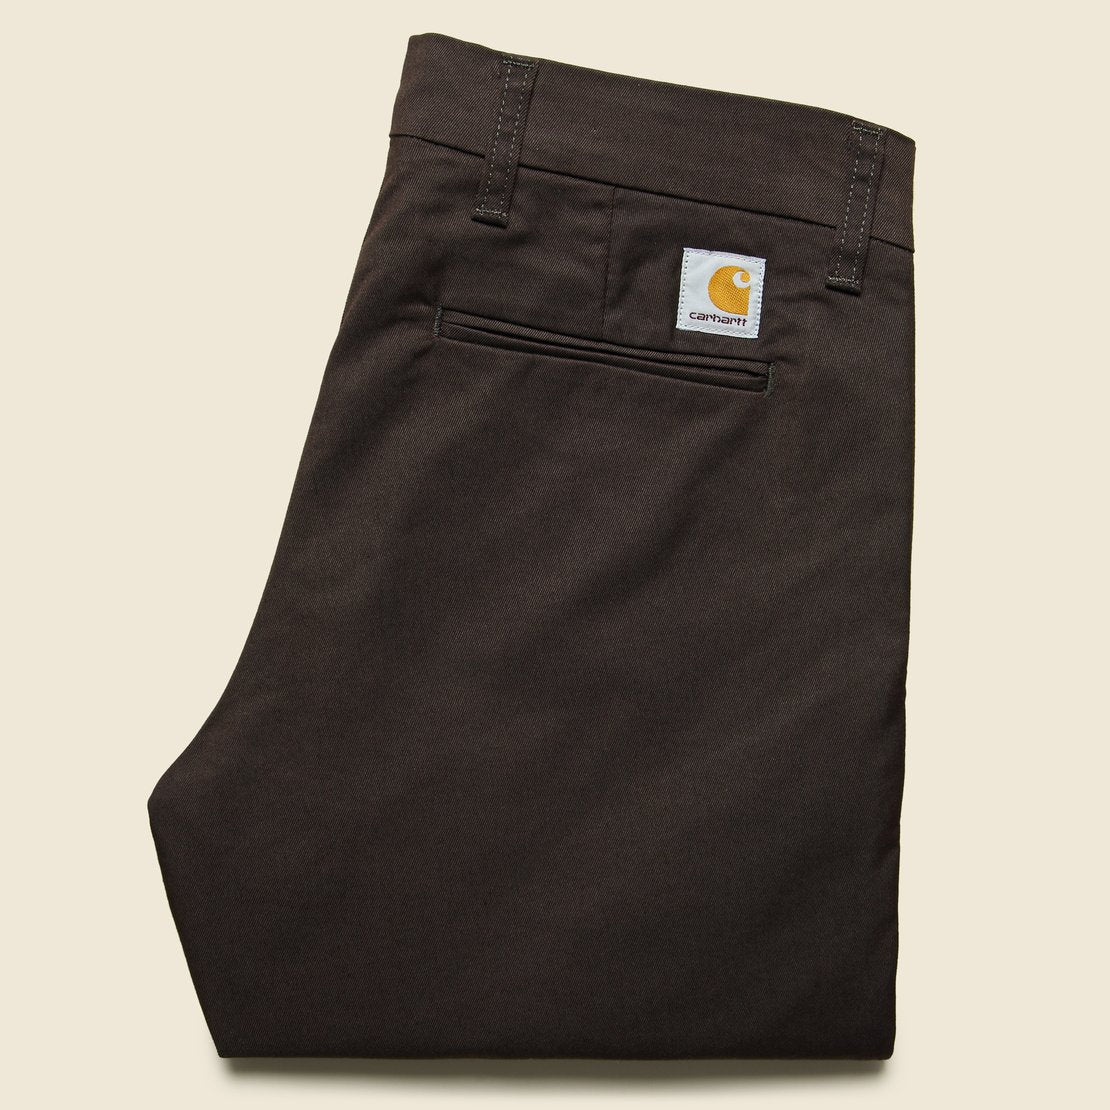 Sid Pant - Tobacco - Carhartt WIP - STAG Provisions - Pants - Twill